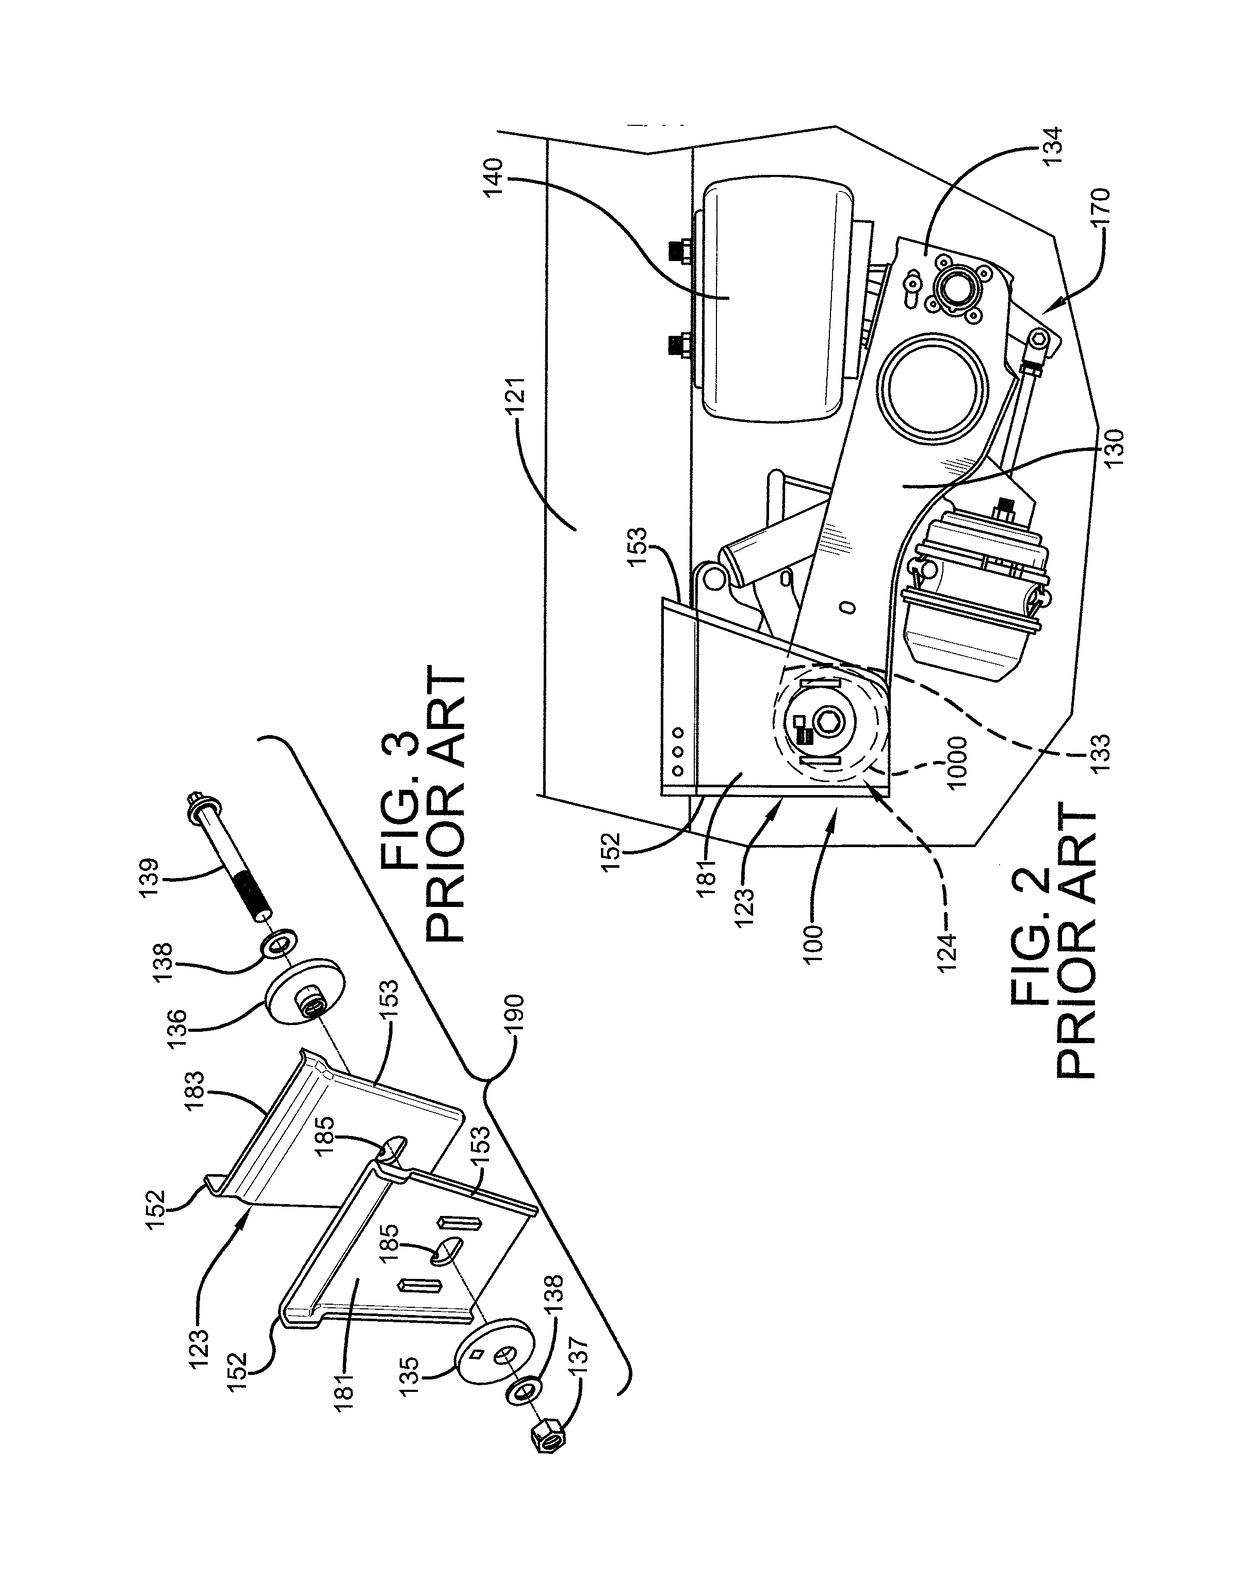 Pivotal connection for heavy-duty vehicle suspension assembly